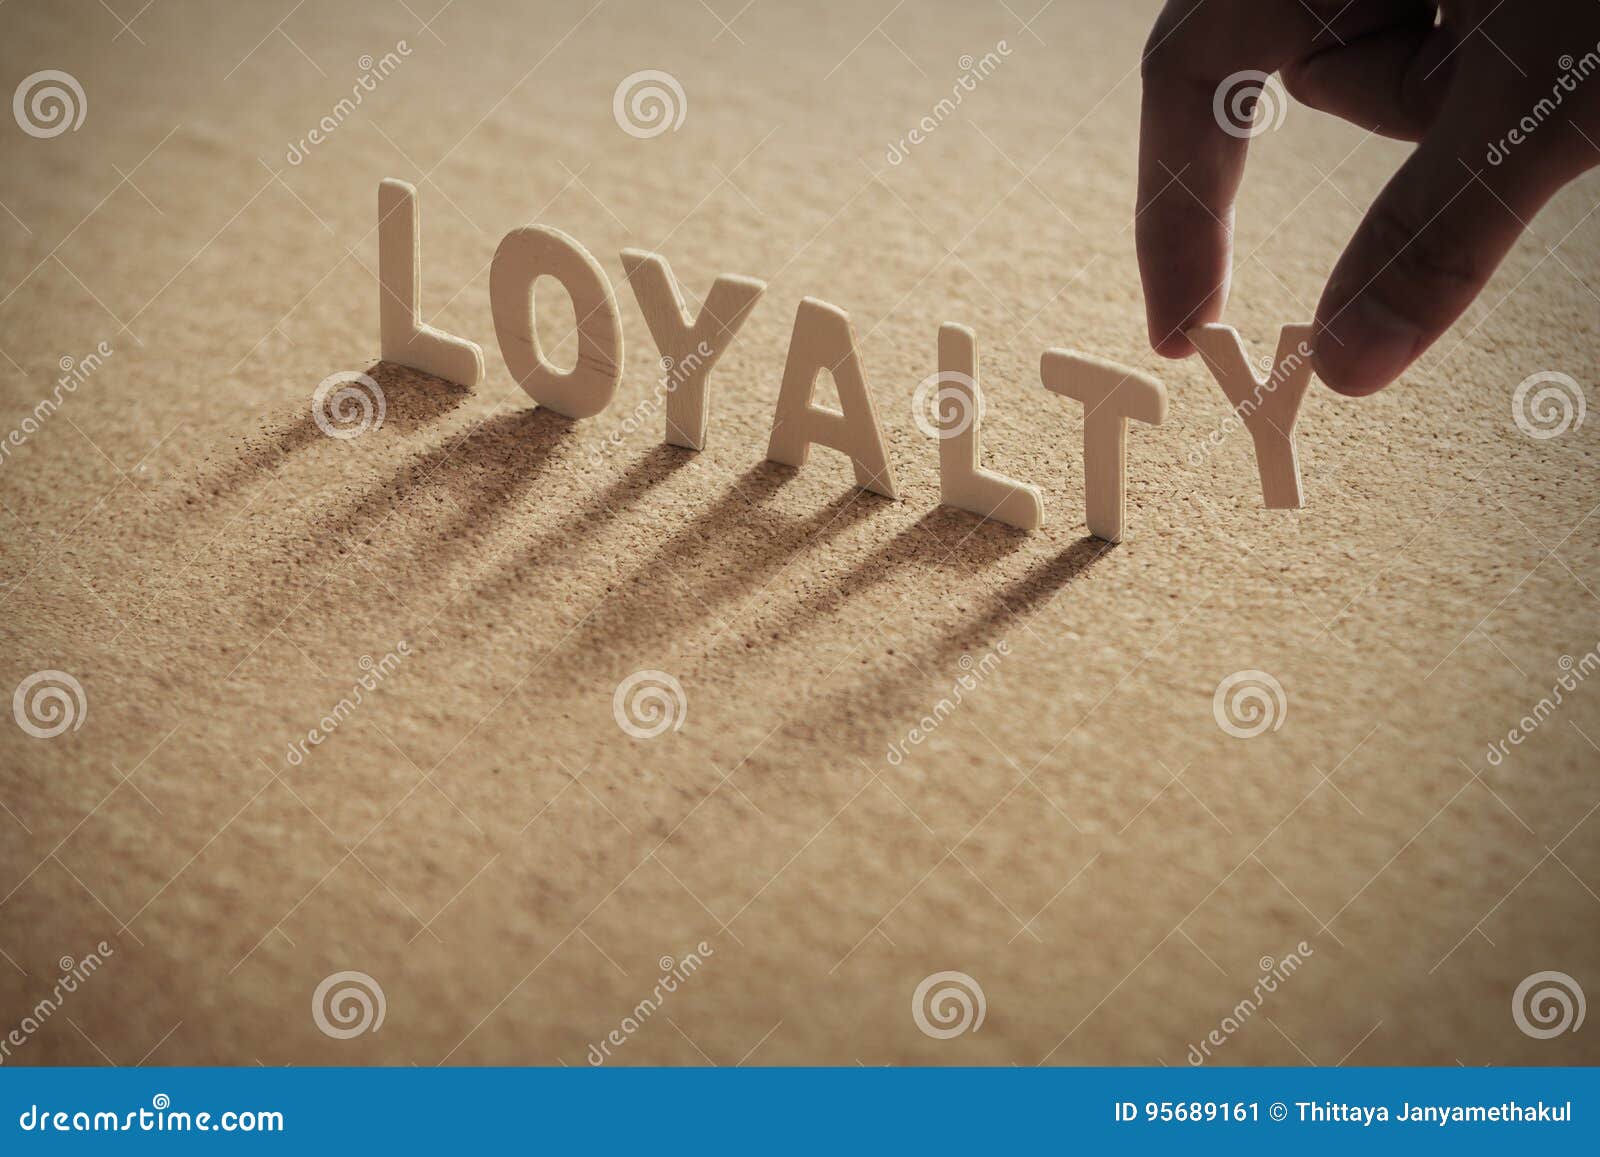 loyalty wood word on compressed board